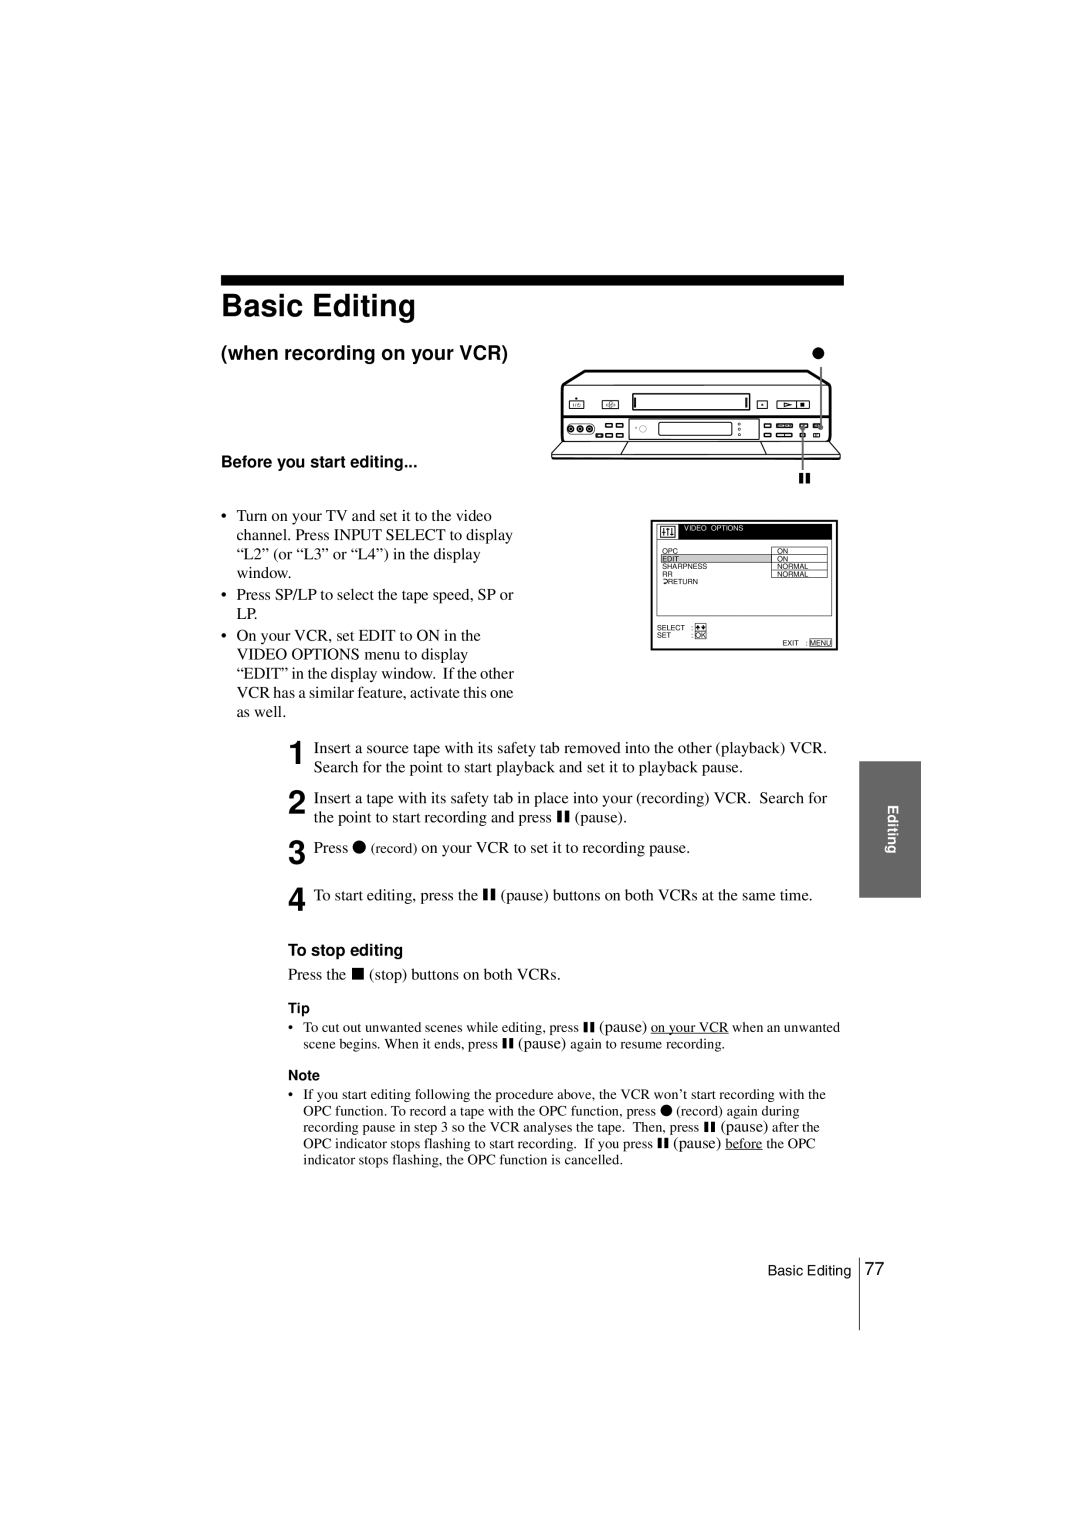 Sony SLV-SF990G manual Basic Editing, when recording on your VCR, Before you start editing, To stop editing 